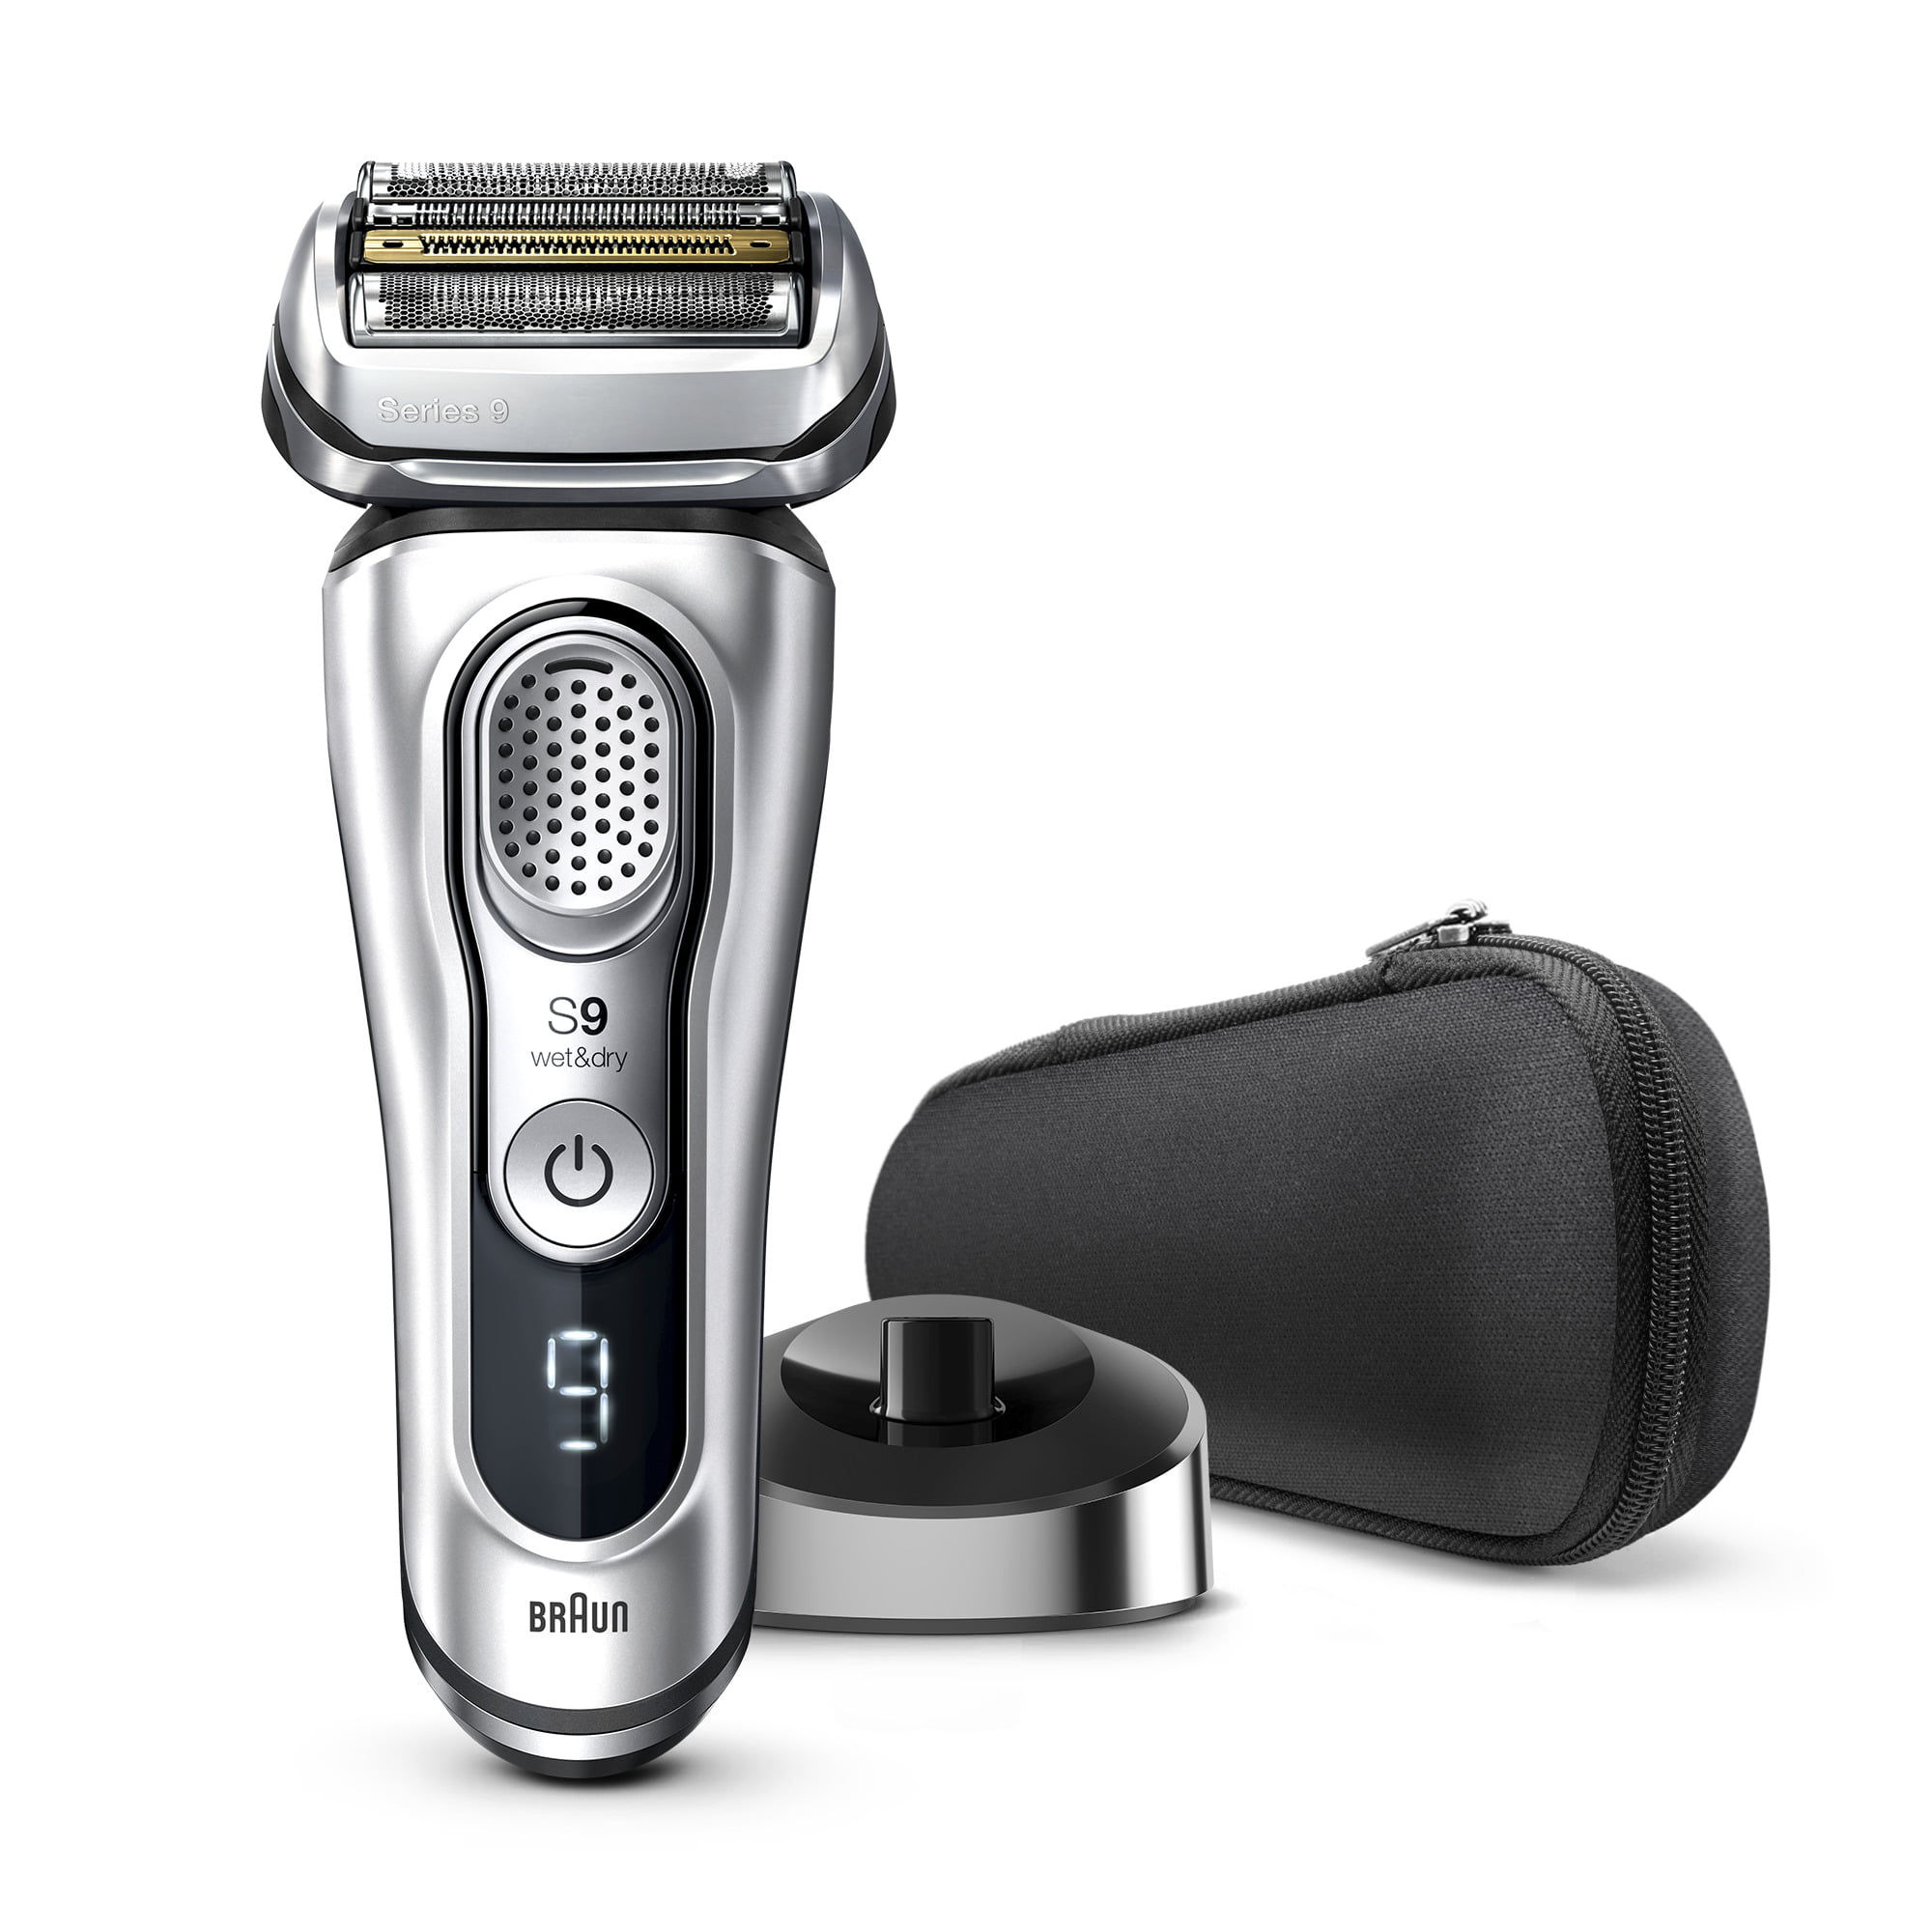 BRAUN Men's Shaver Series 9 9050CC New from Japan Free Shipping w/Track 